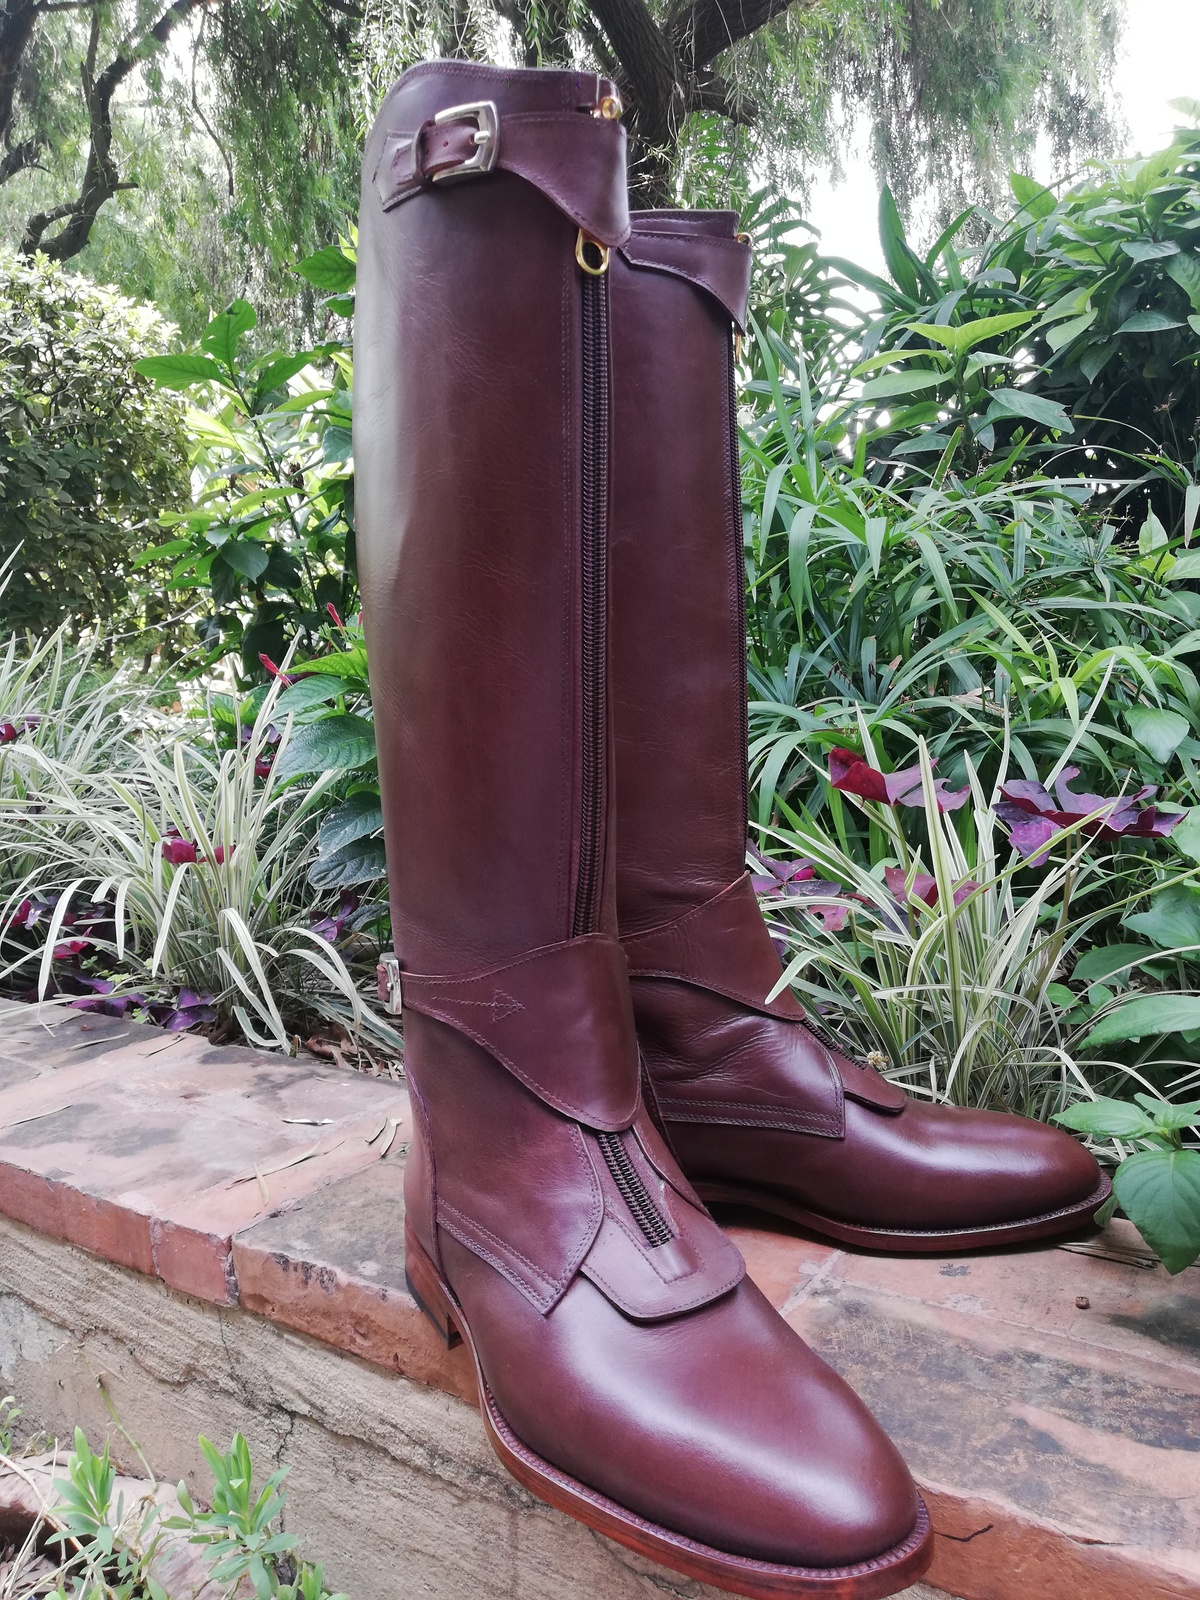 Brown Handmade Tall Leather Riding Boots Men Boots for Horse Riding Polo Boots